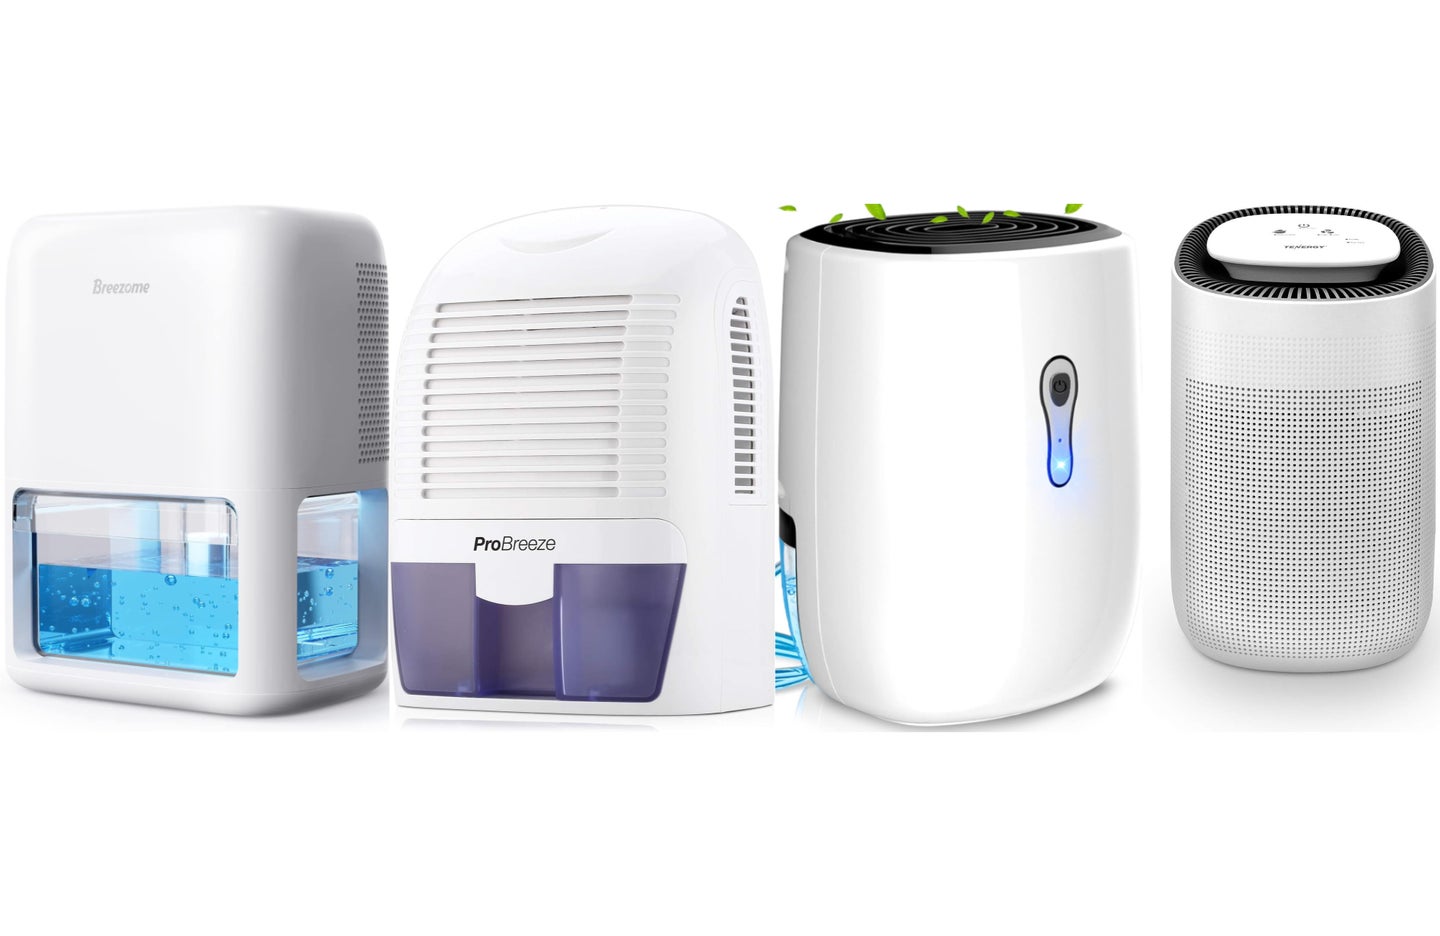 Four of the best small humidifiers side by side on a plain white background.